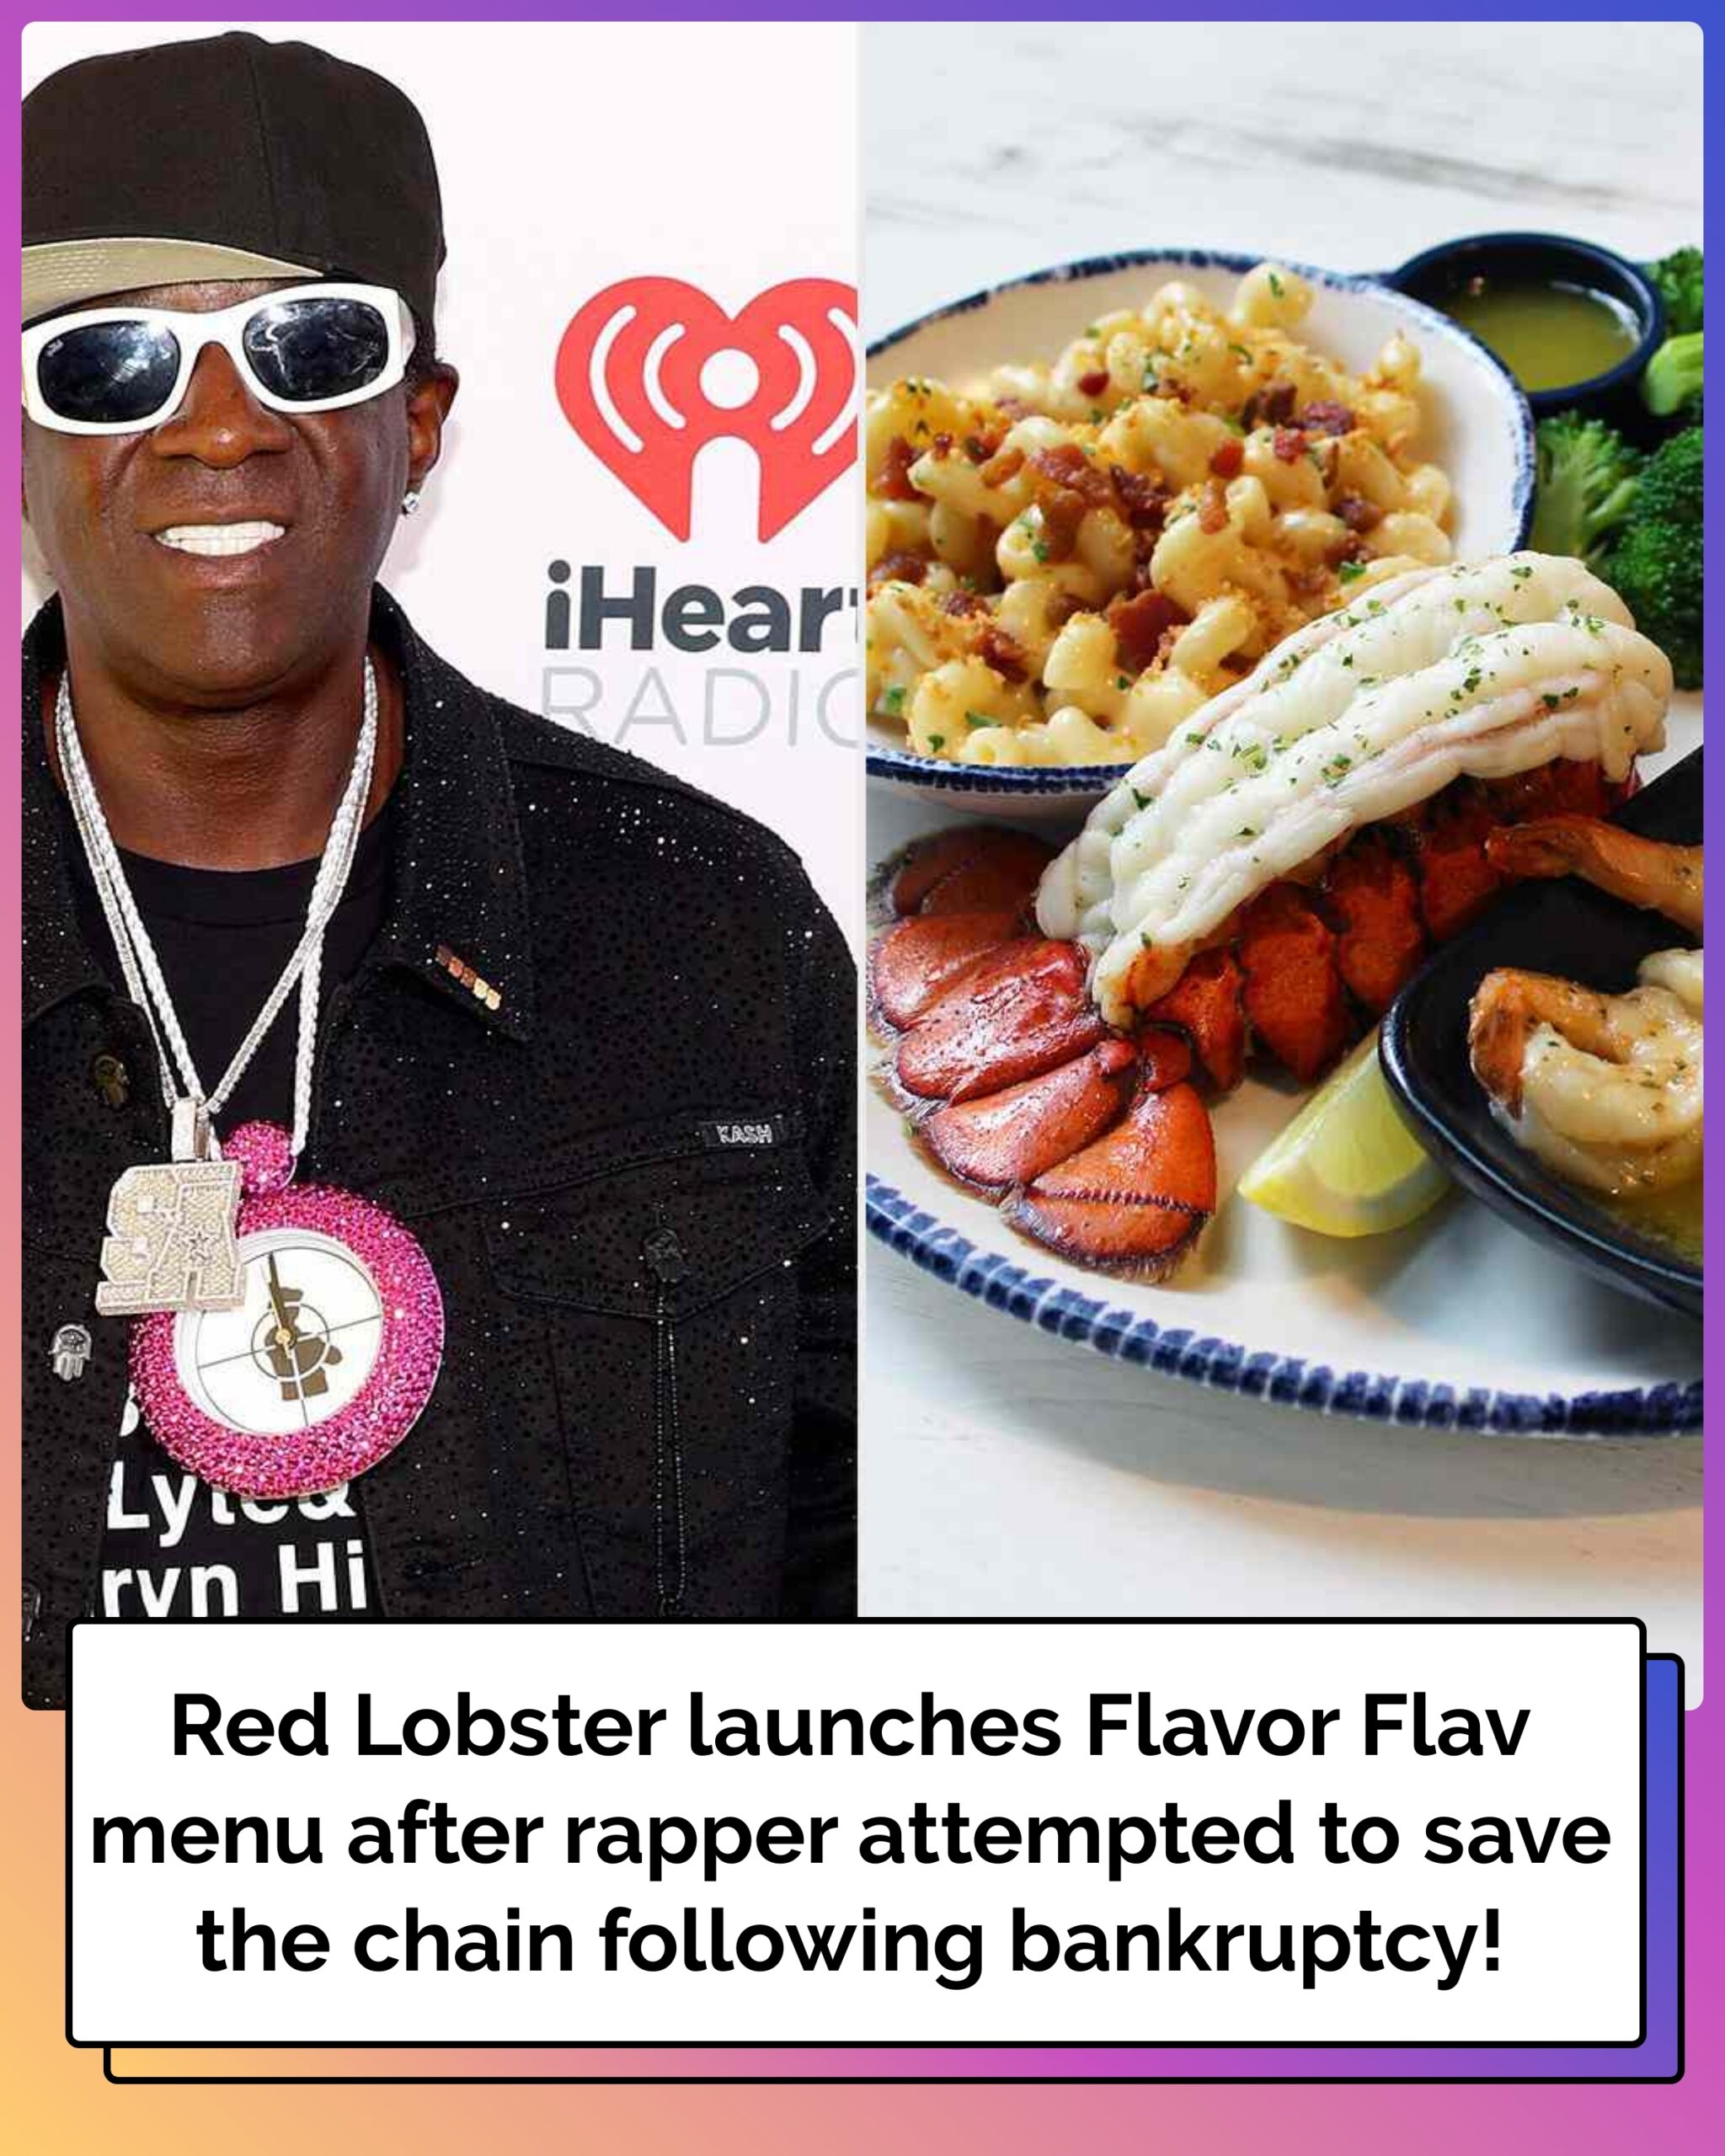 Red Lobster Launches Flavor Flav Menu After Rapper Attempted to Save the Chain Following Bankruptcy